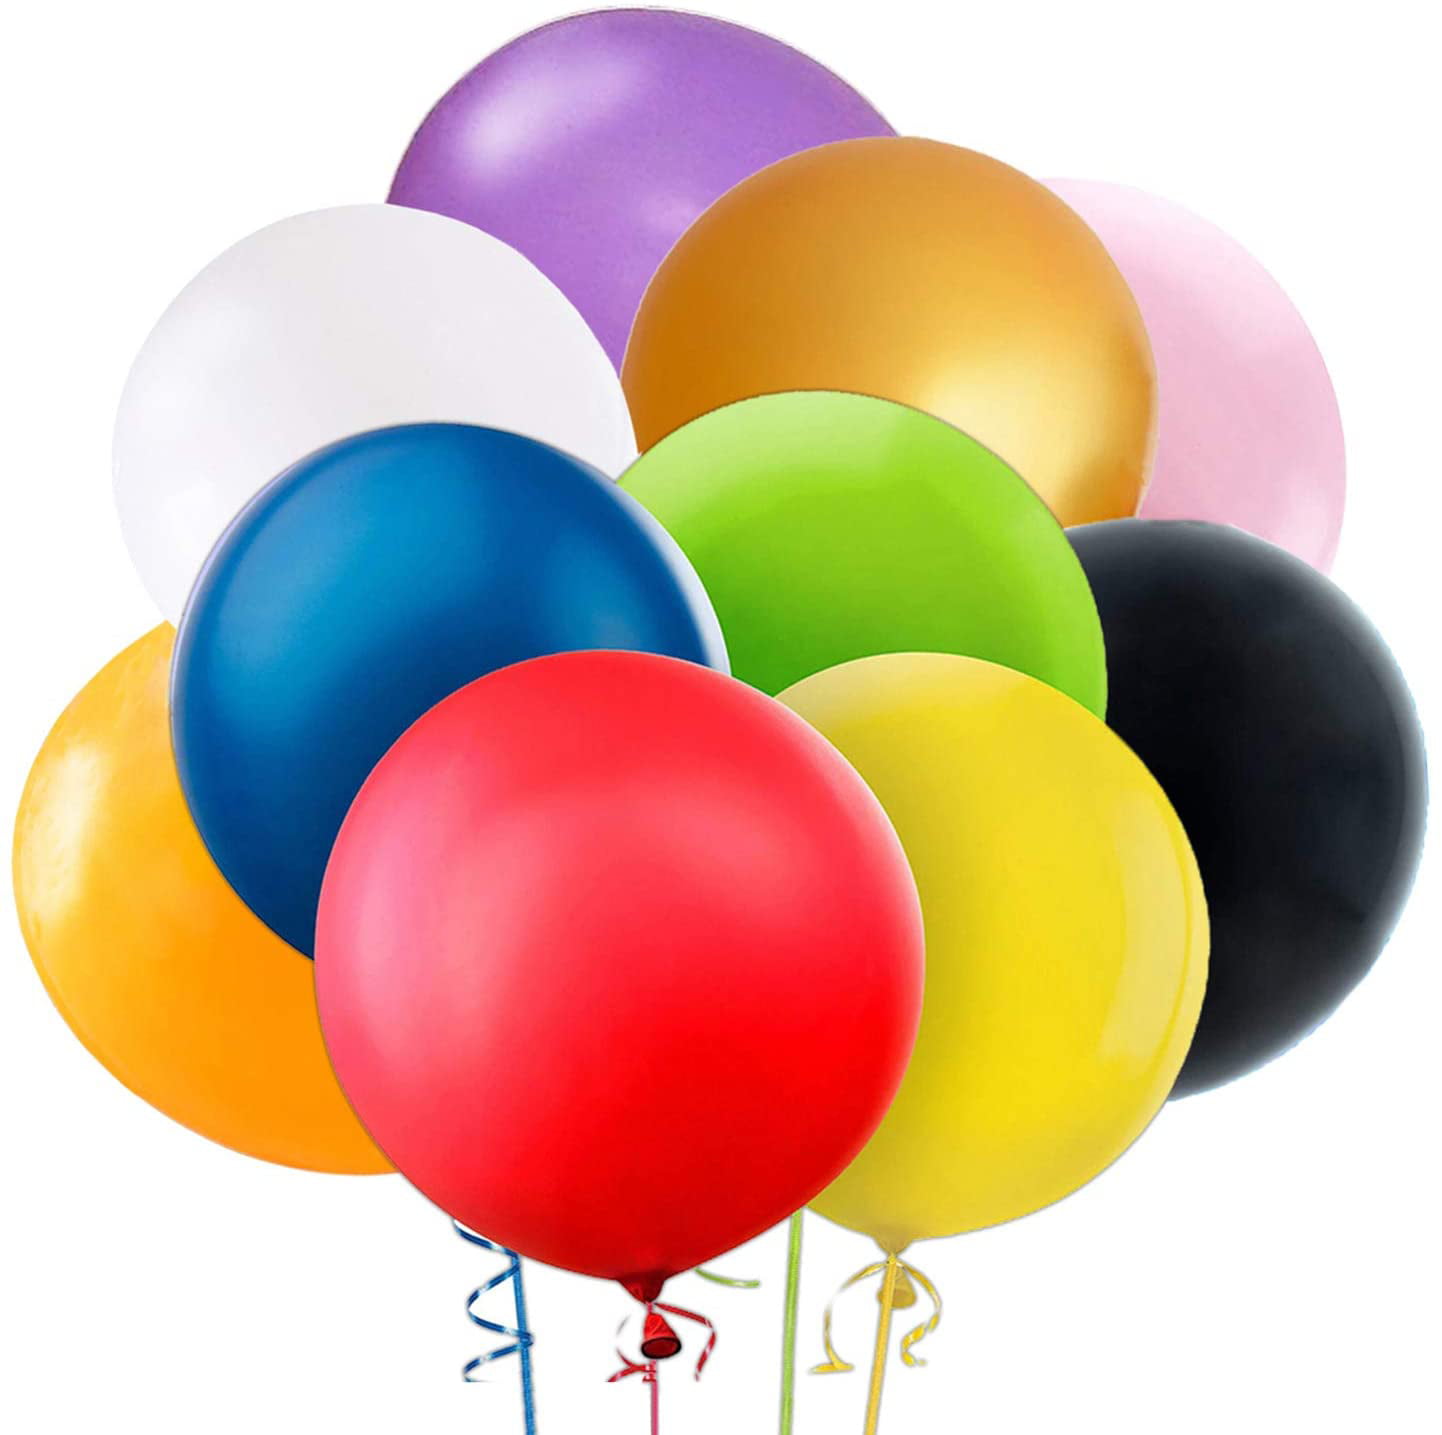 30-100 Latex LARGE Helium Air Quality Party Birthday Wedding Balloons baloons 